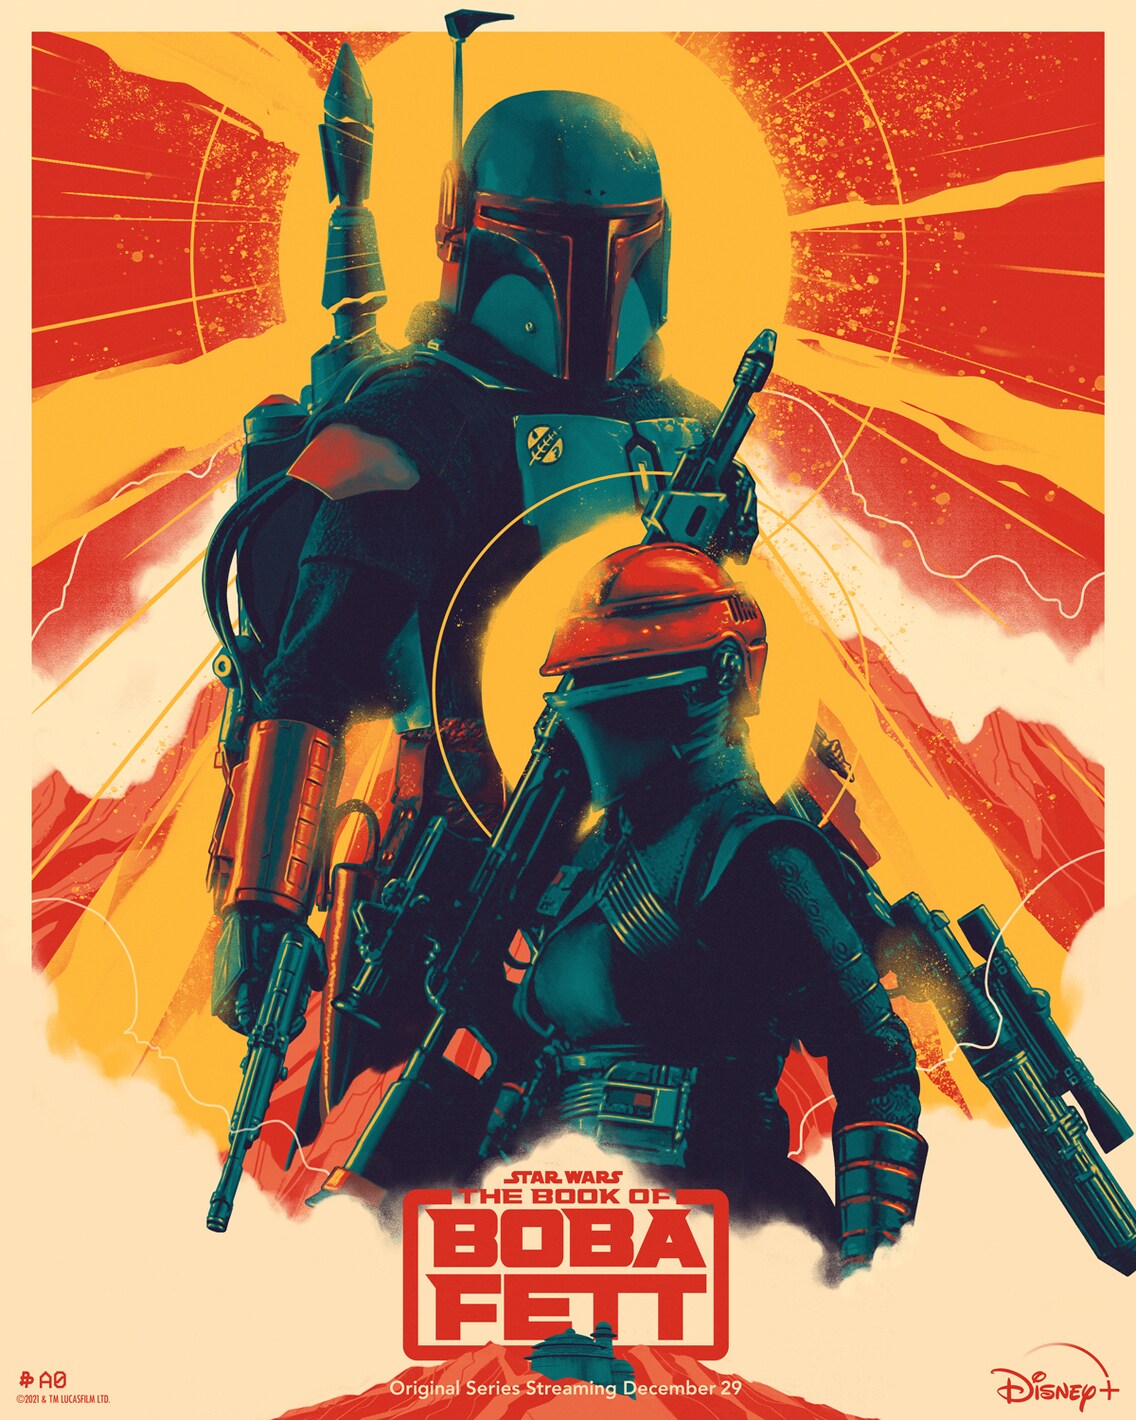 Poster Gallery | The Book Boba Fett of